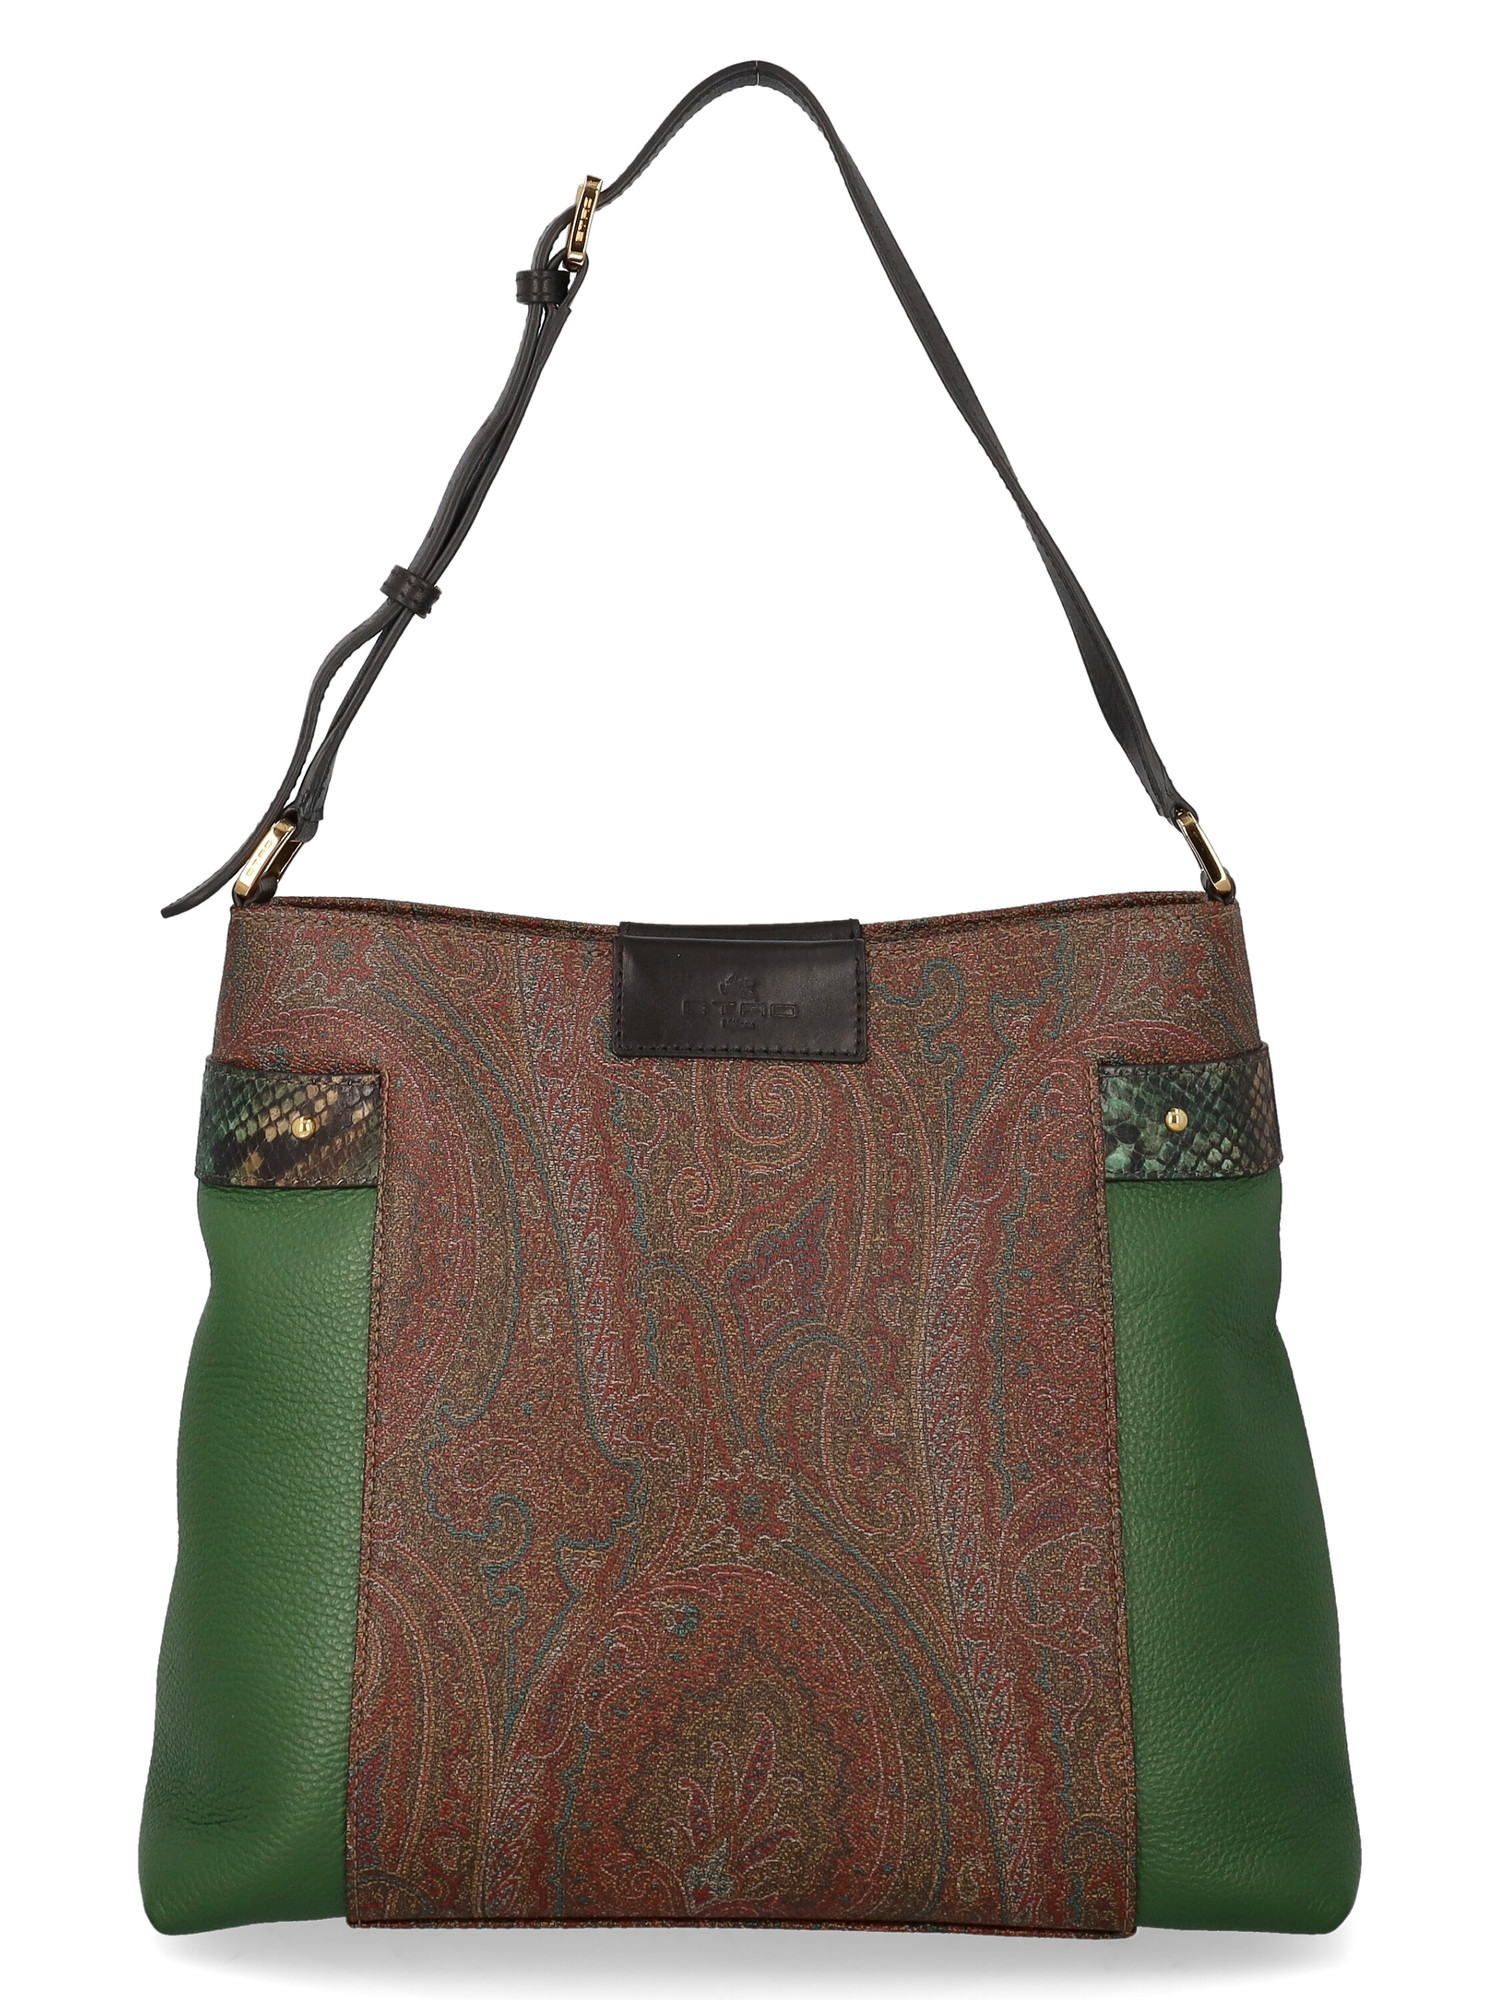 Condition: Excellent, Other Patterns Leather, Color: Brown, Green, Multicolor -  -  -